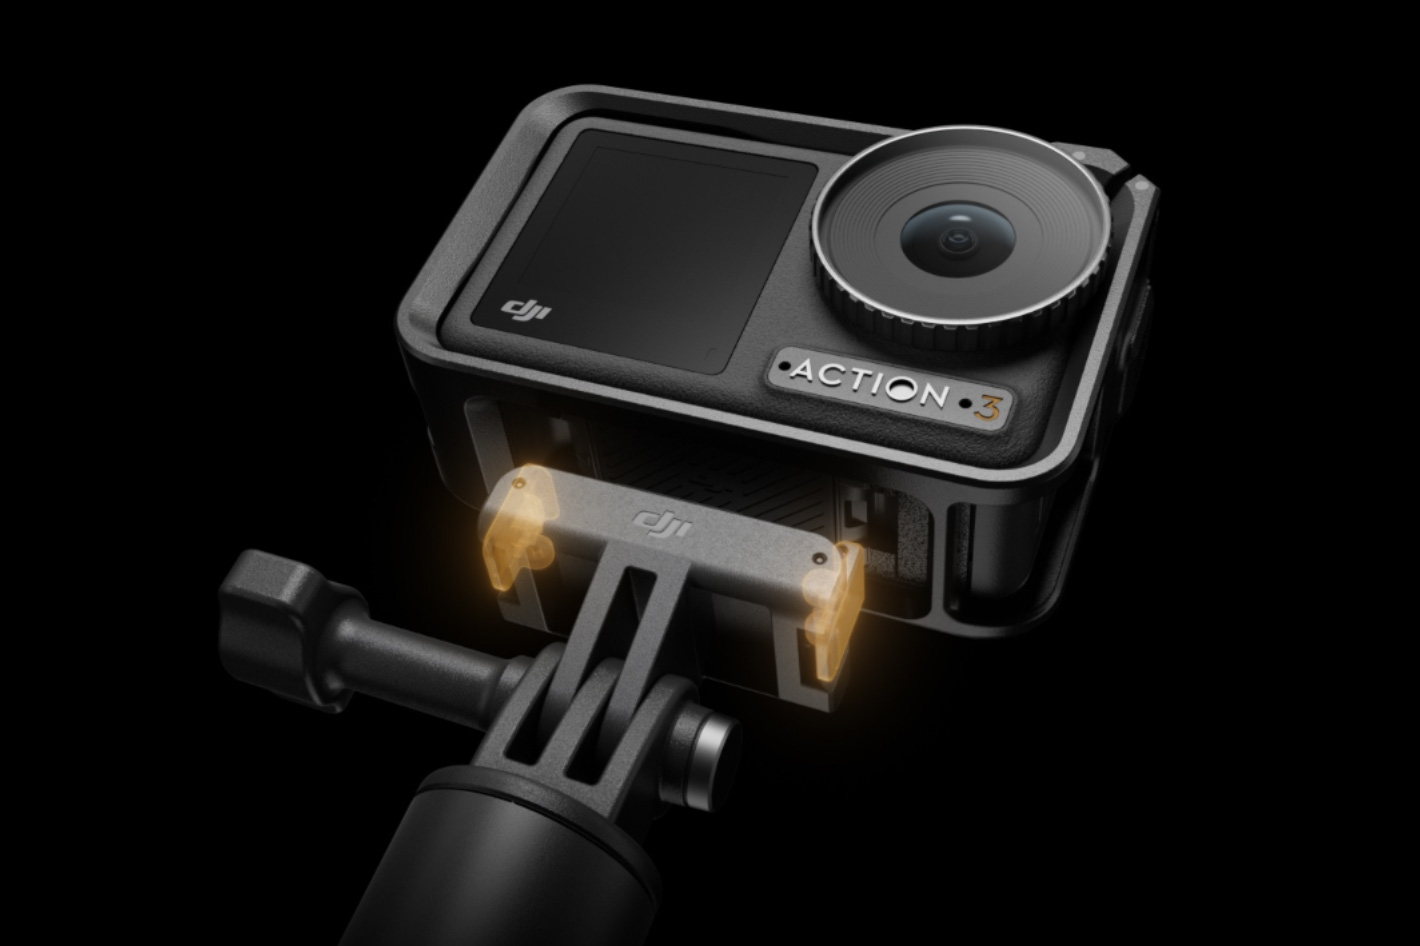 DJI Osmo Action 3 features vertical shooting as an option